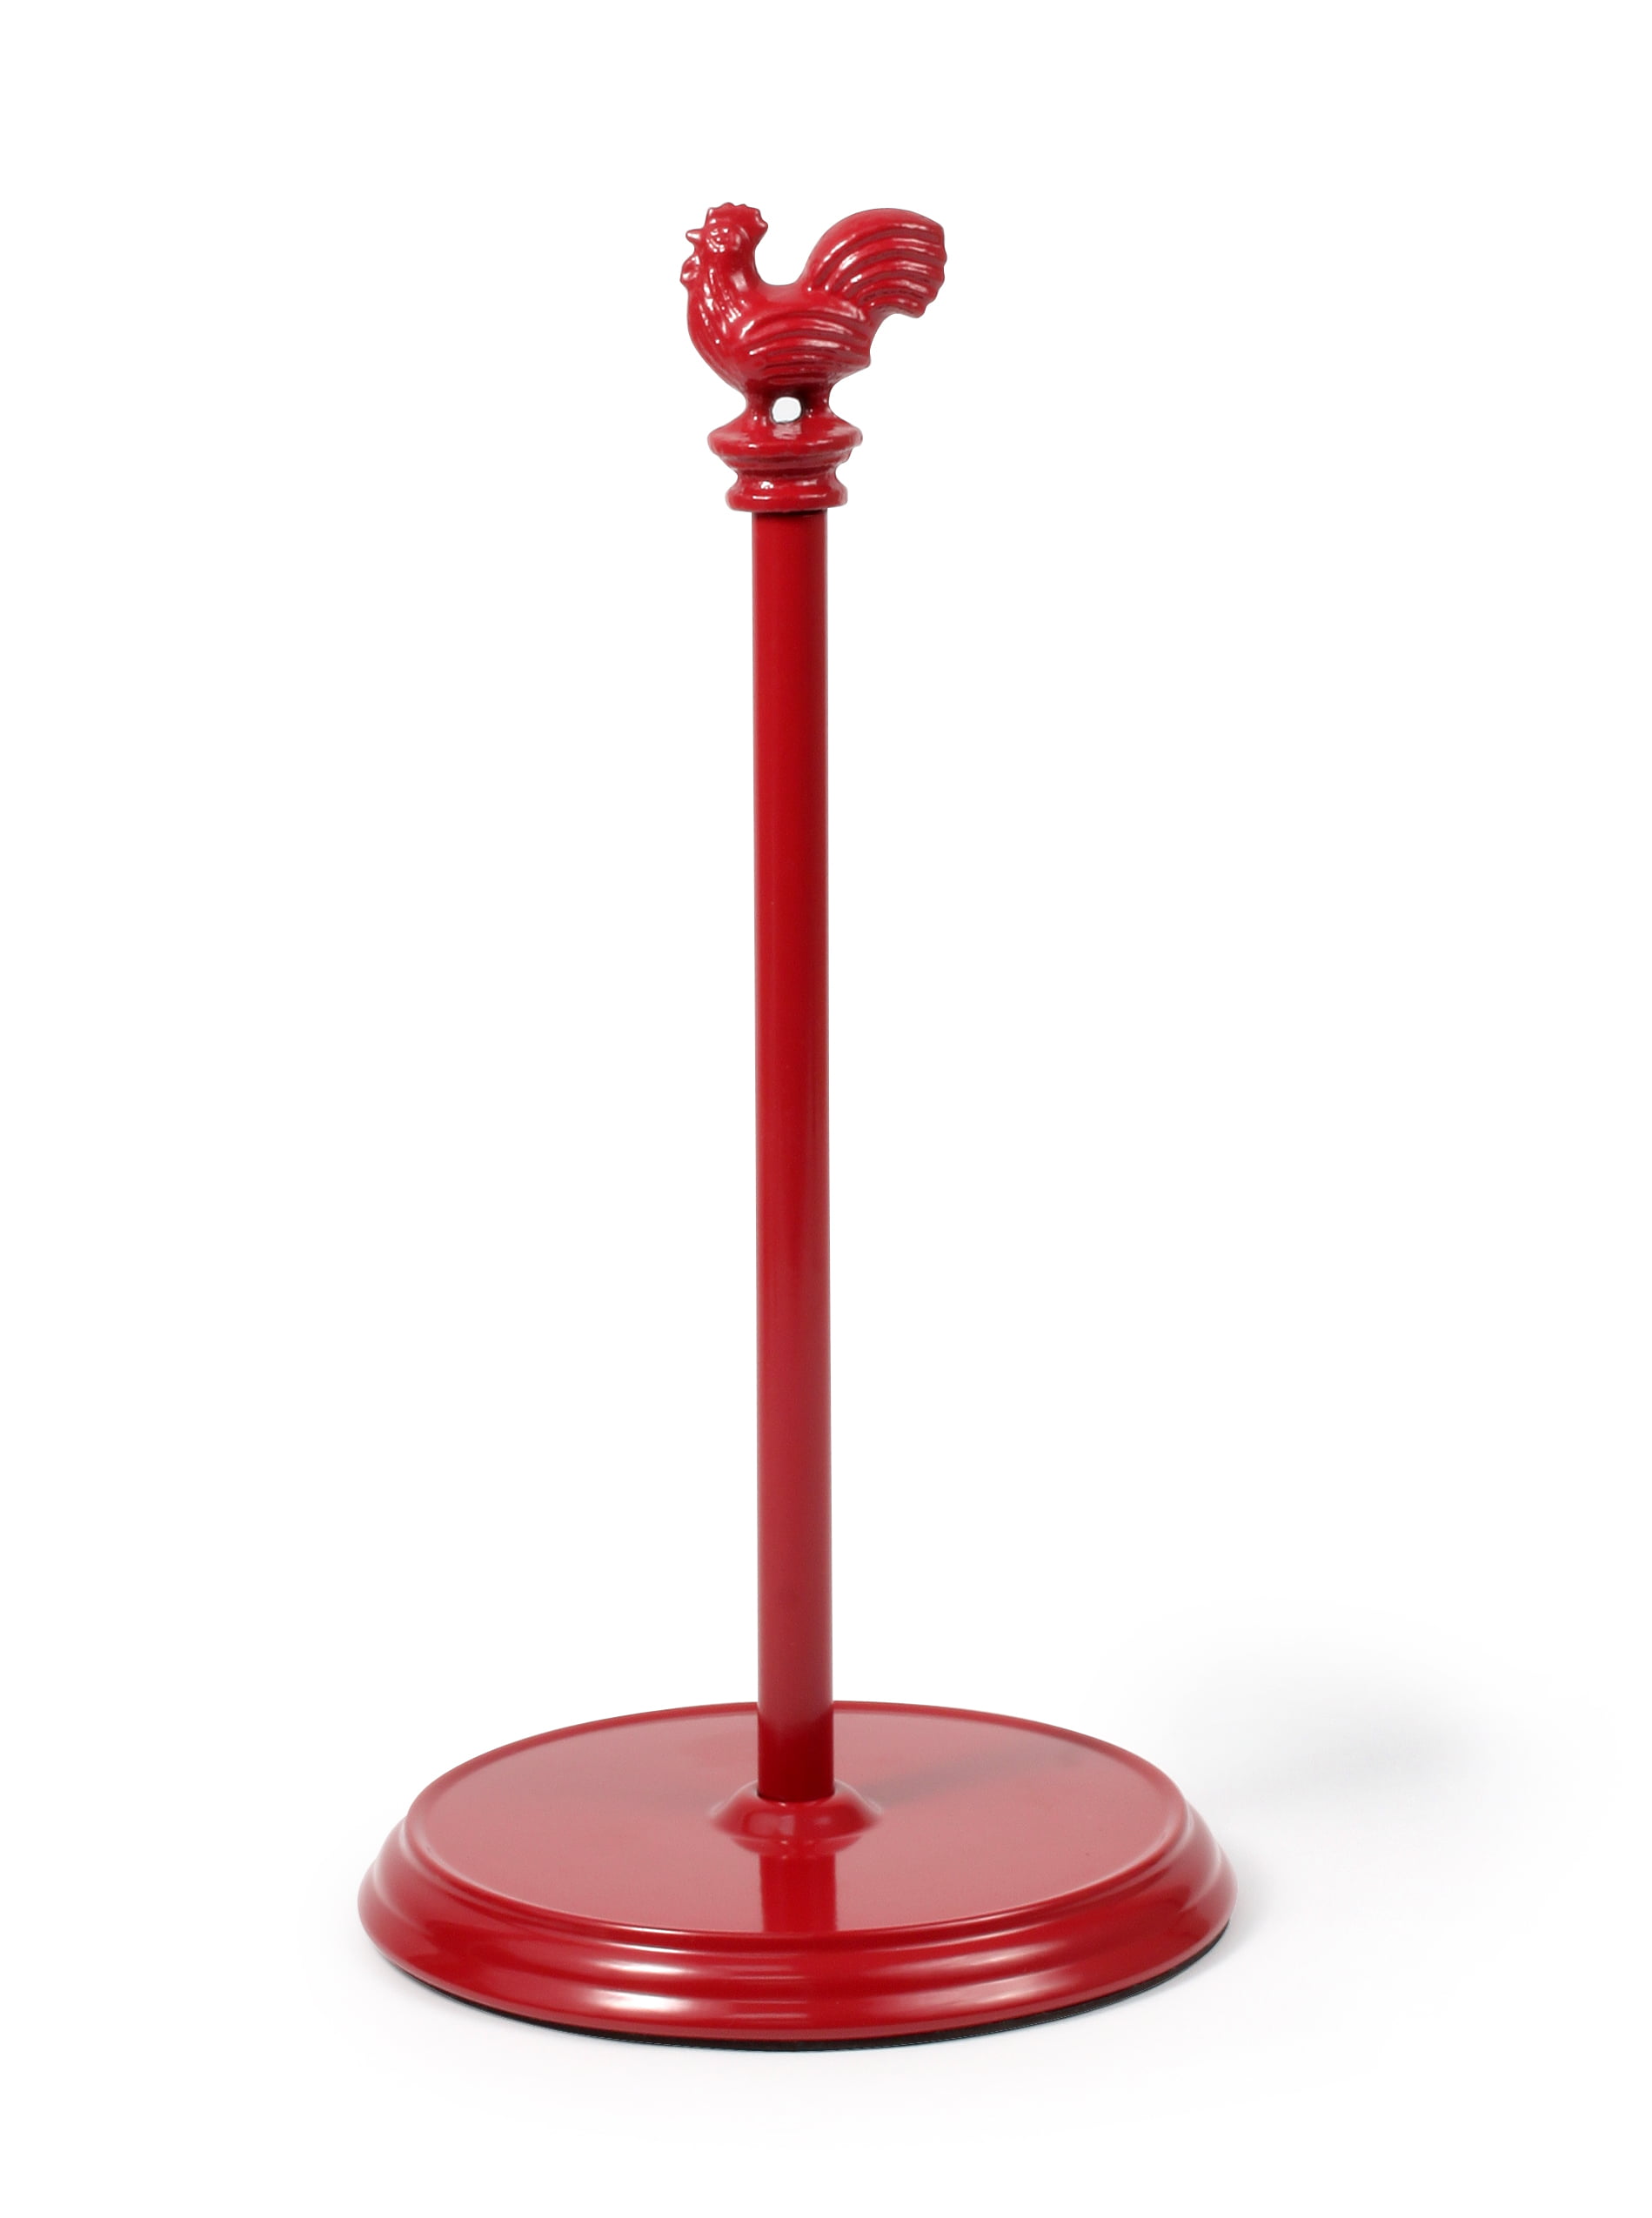 Swan Retro Free Standing Red Paper Towel Holder 124943 - The Home